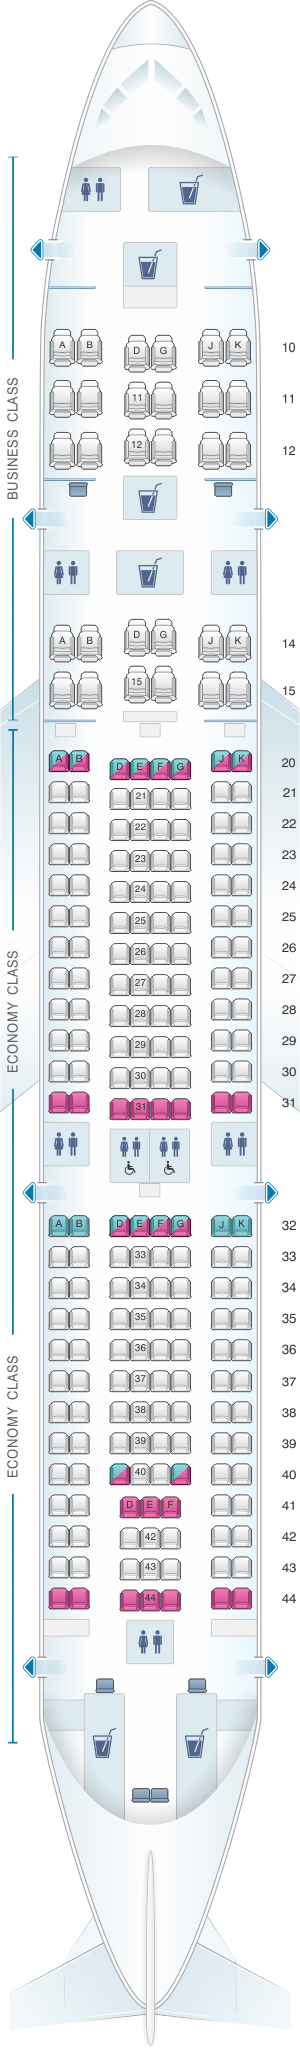 Seat map for Oman Air Airbus A330 200